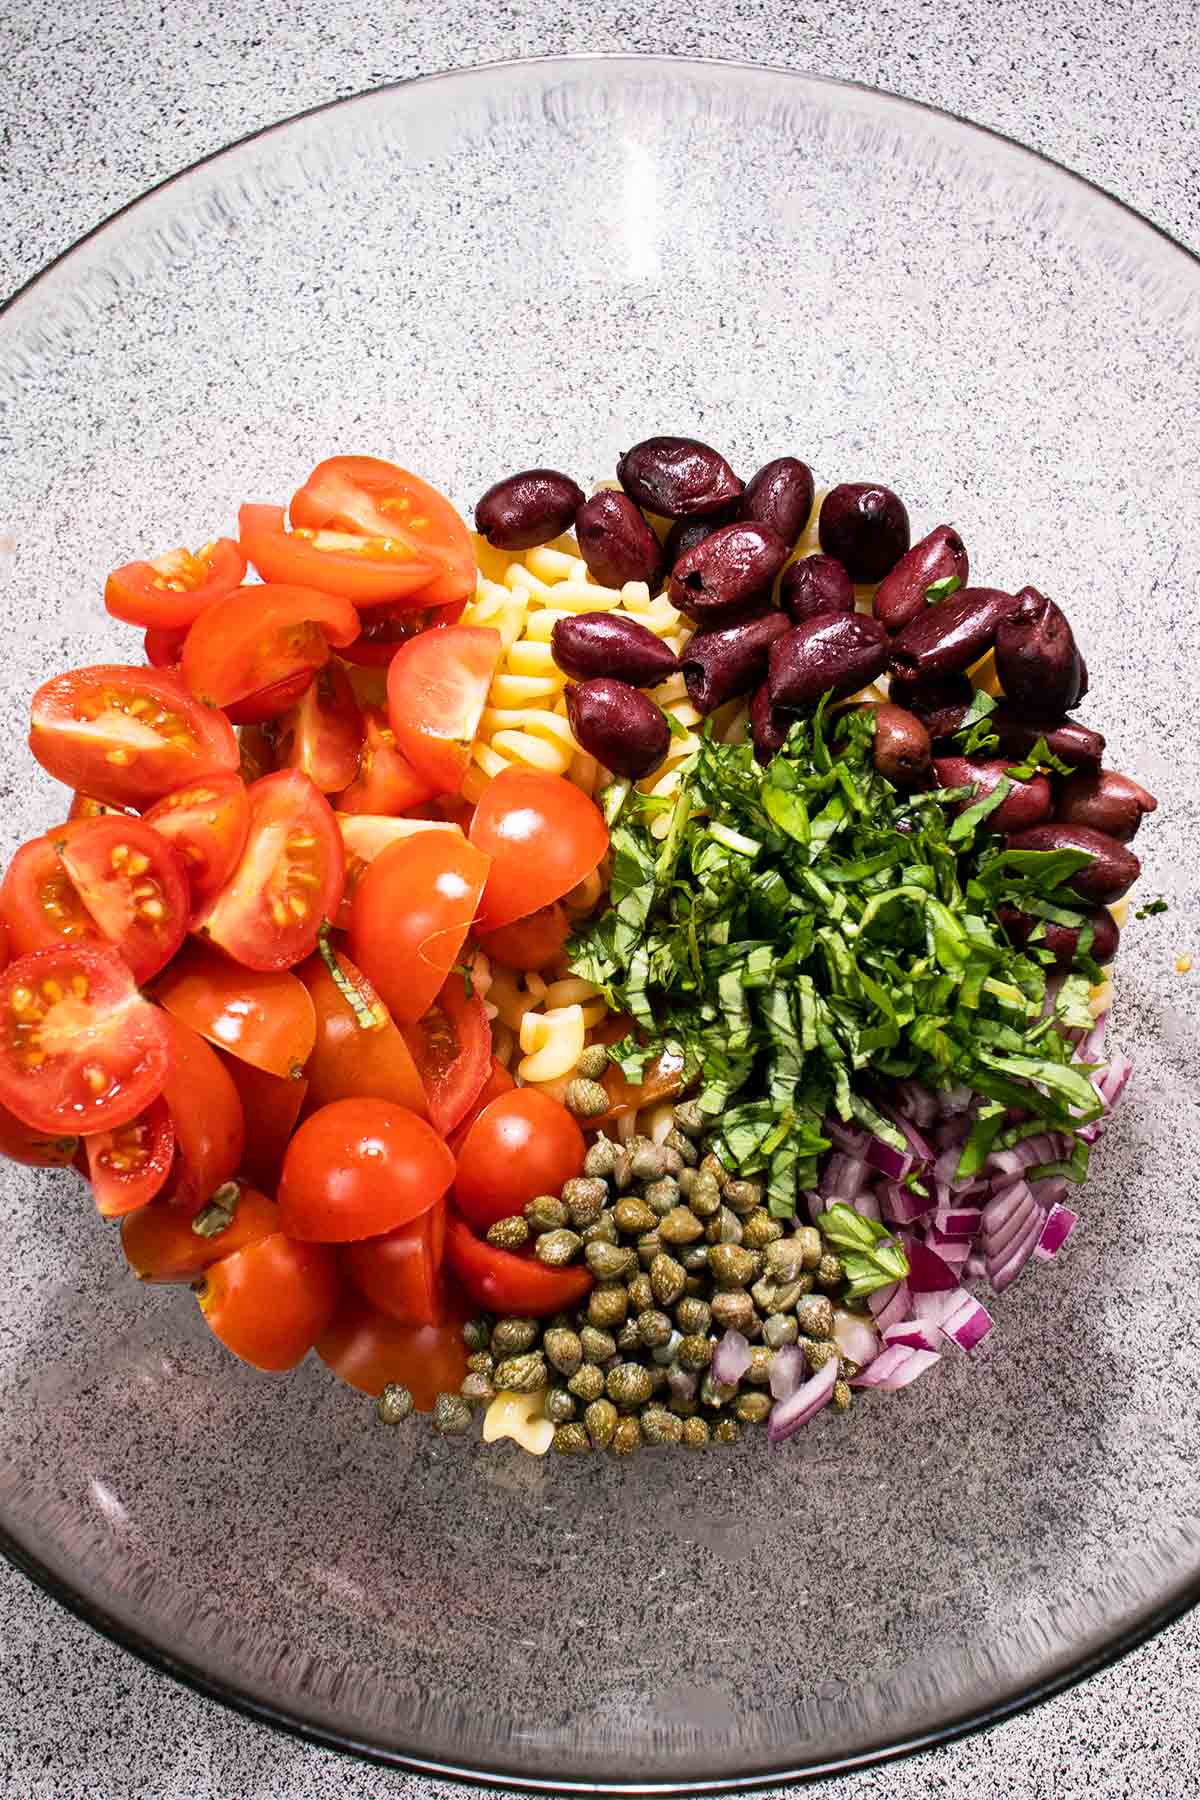 prepare ingredients in a mixing bowl for pasta salad